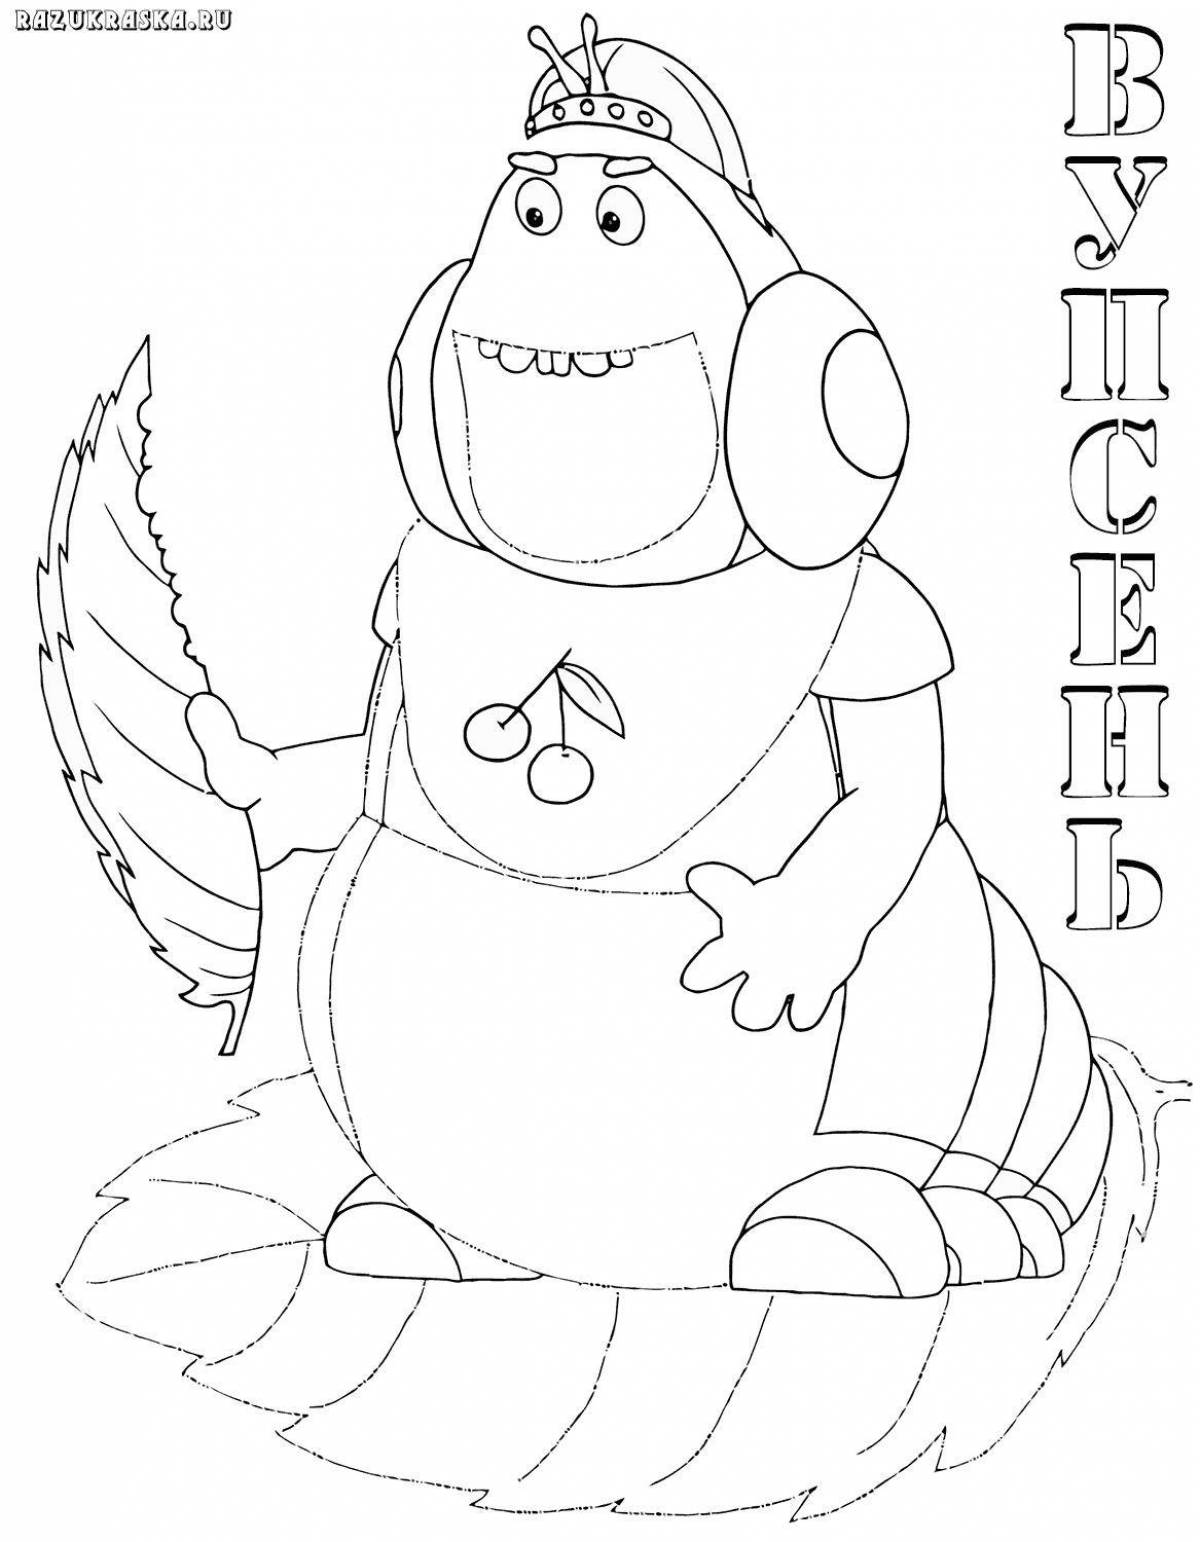 Fun poof and poof coloring page